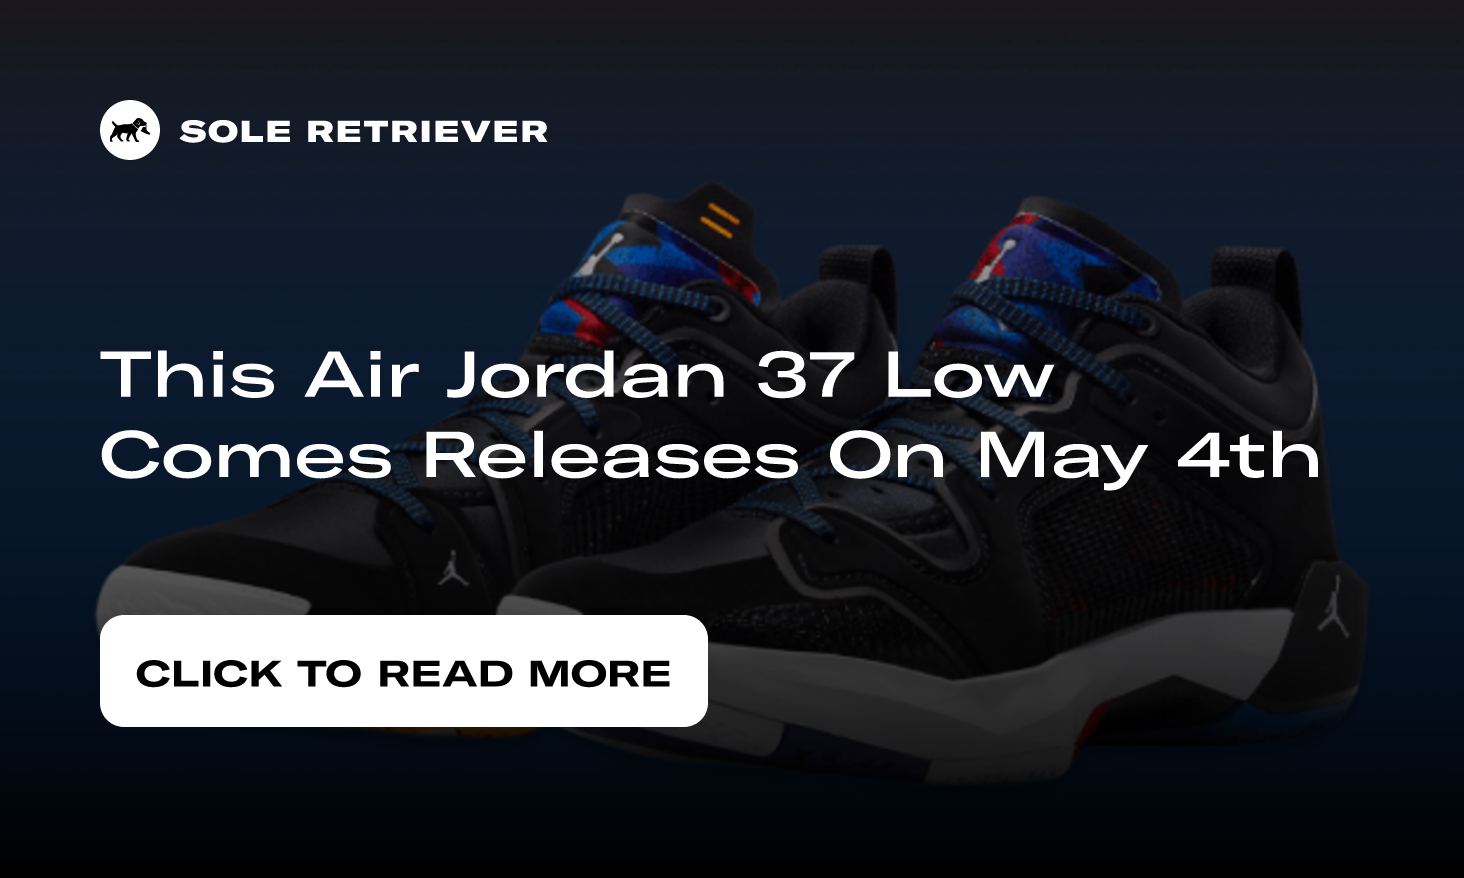 This Air Jordan 37 Low Comes Releases On May 4th